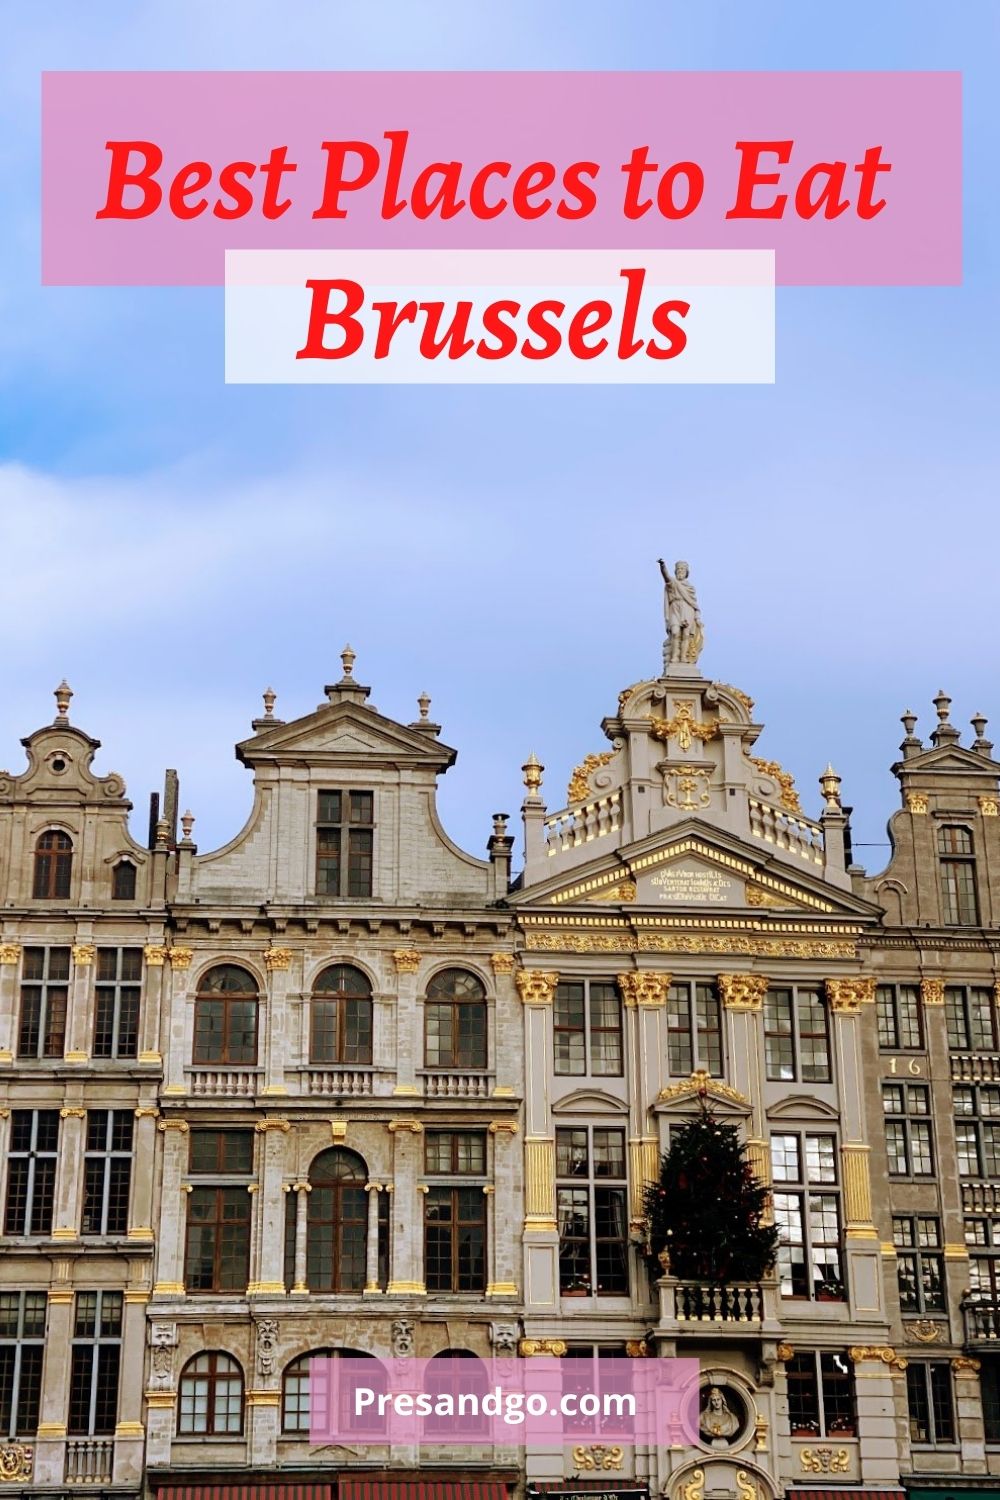 head picture showing beautiful buildings in Brussels Belgium and the title of the blog best places to eat in Brussels